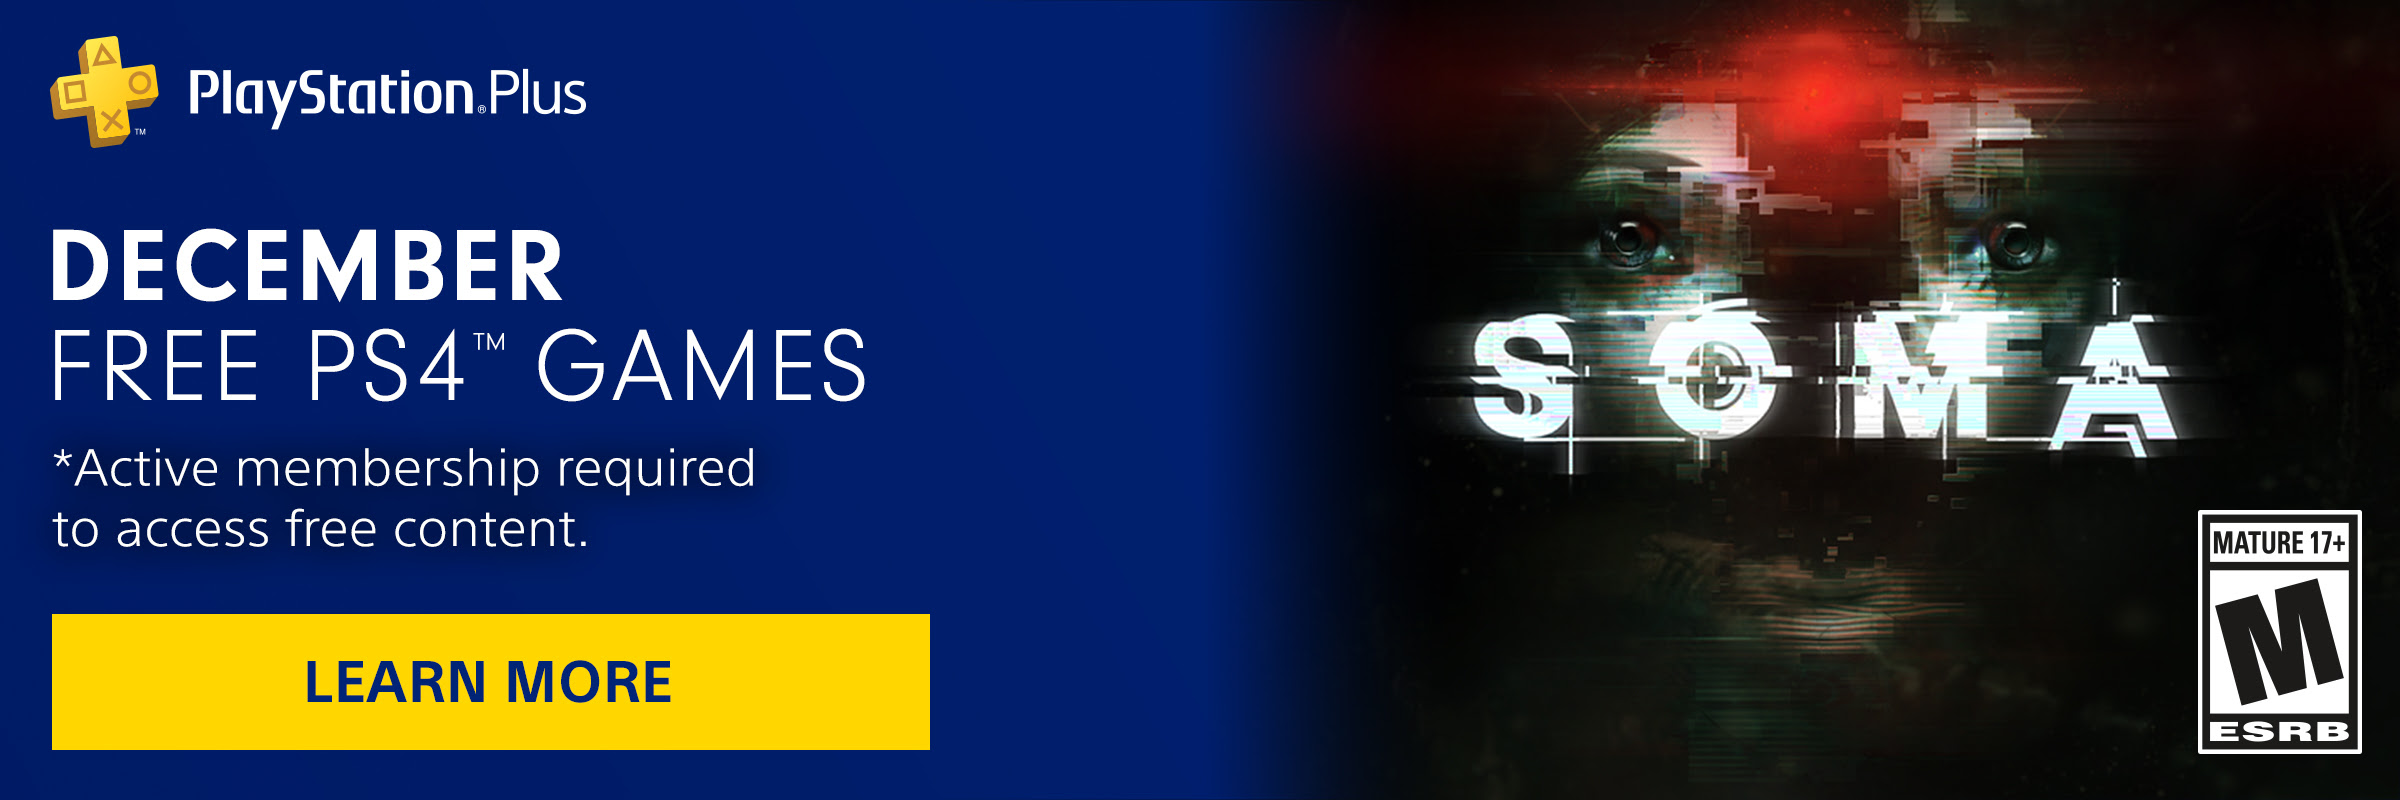 PlayStation Plus | DECEMBER *FREE PS4(TM) GAMES * Active membership required to access free content. | LEARN MORE | Rated M